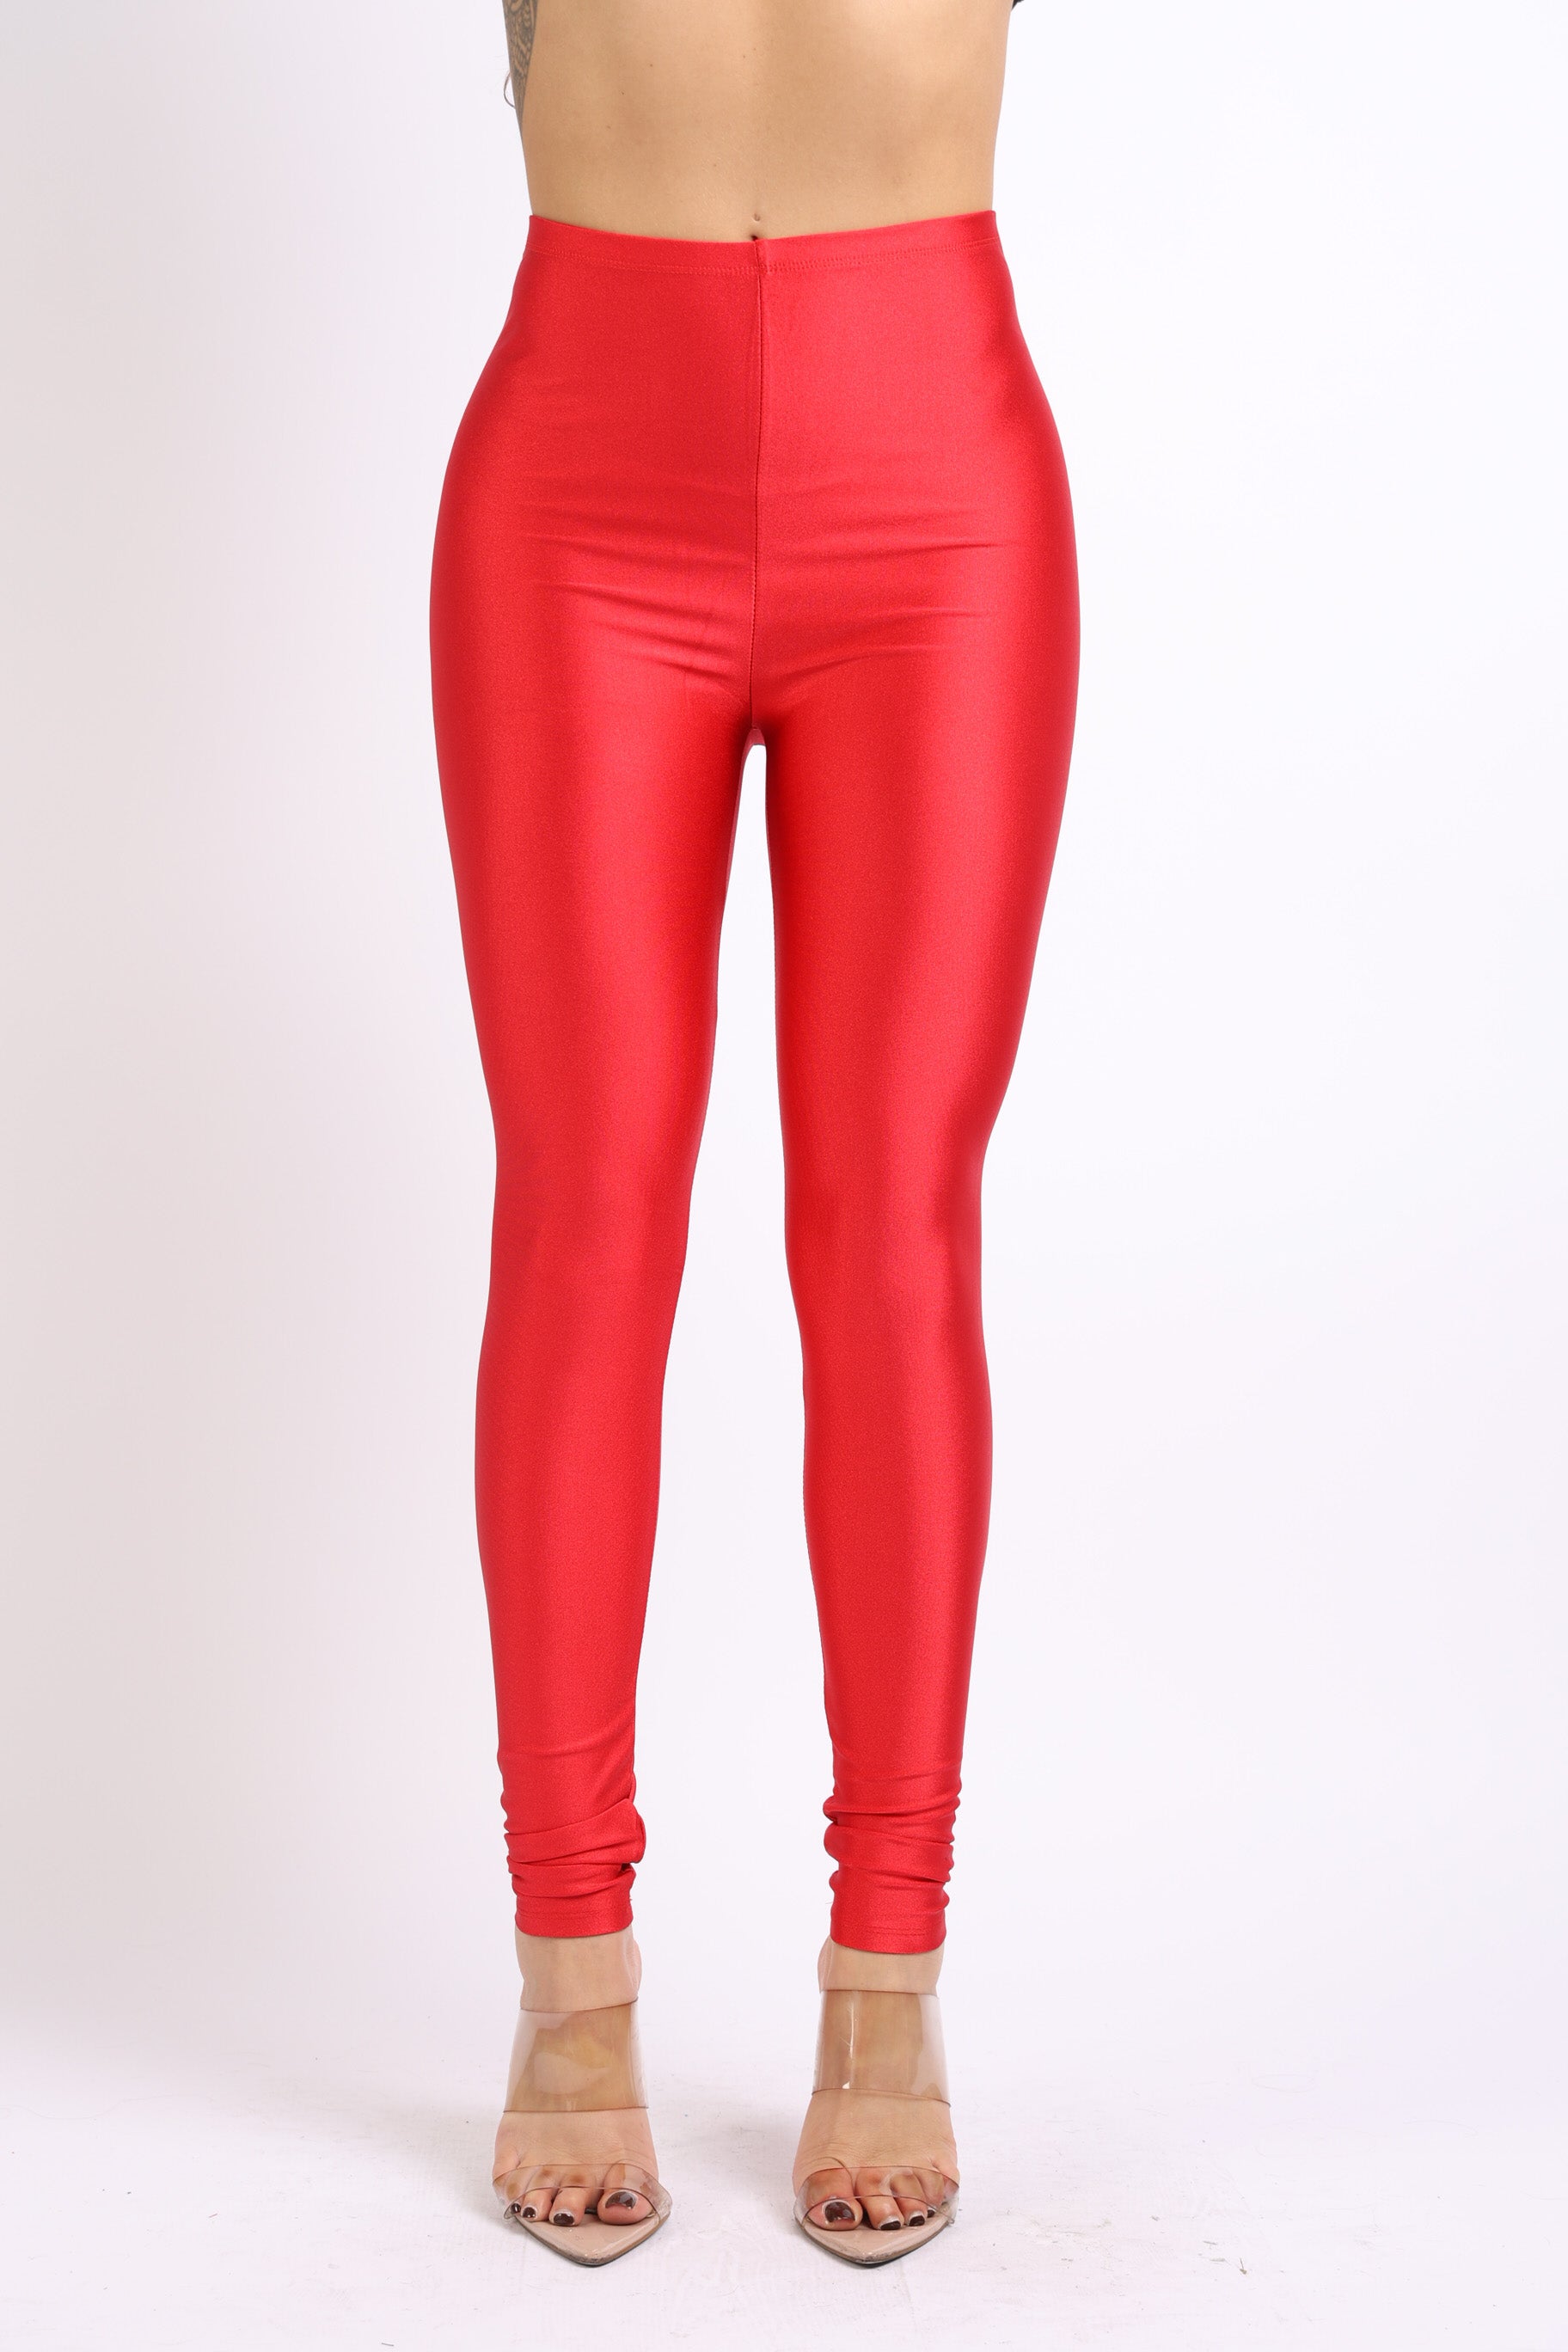 Red orange fuchsia vertical striped slim cropped pants for women jazz hot  pole dance singers stage preformance leggings silky diving pants